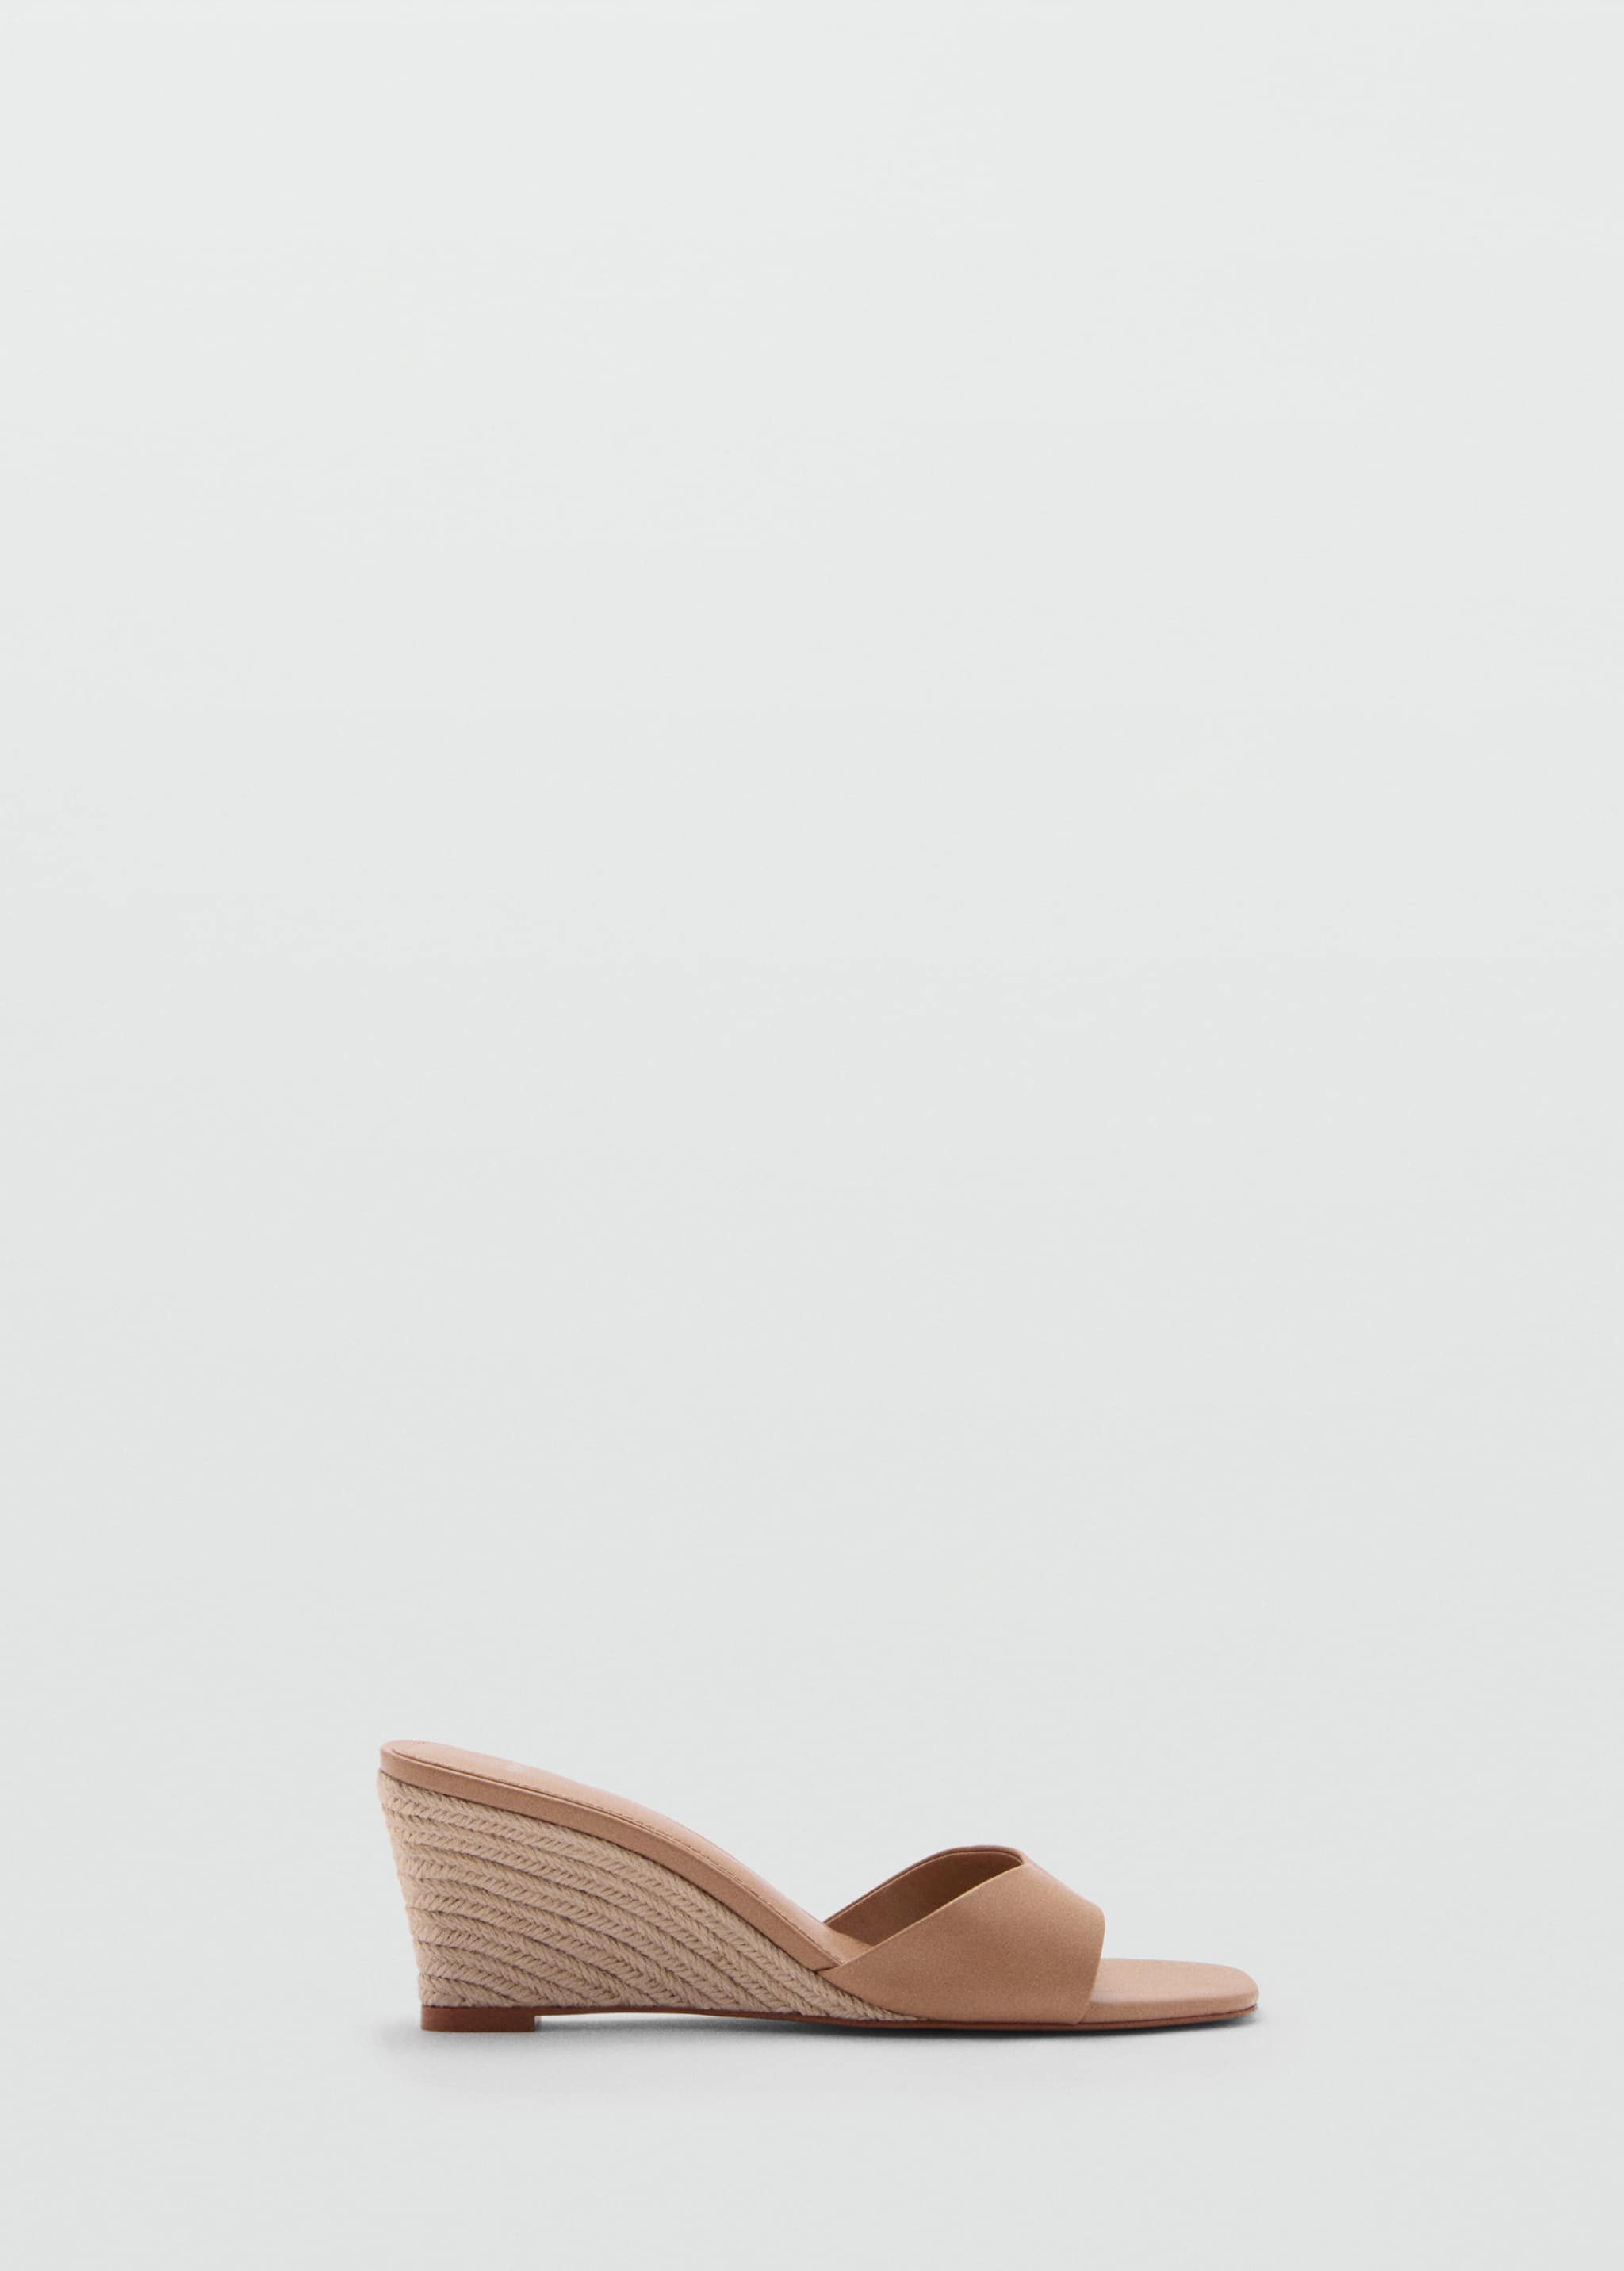 Wedge heeled sandal - Article without model